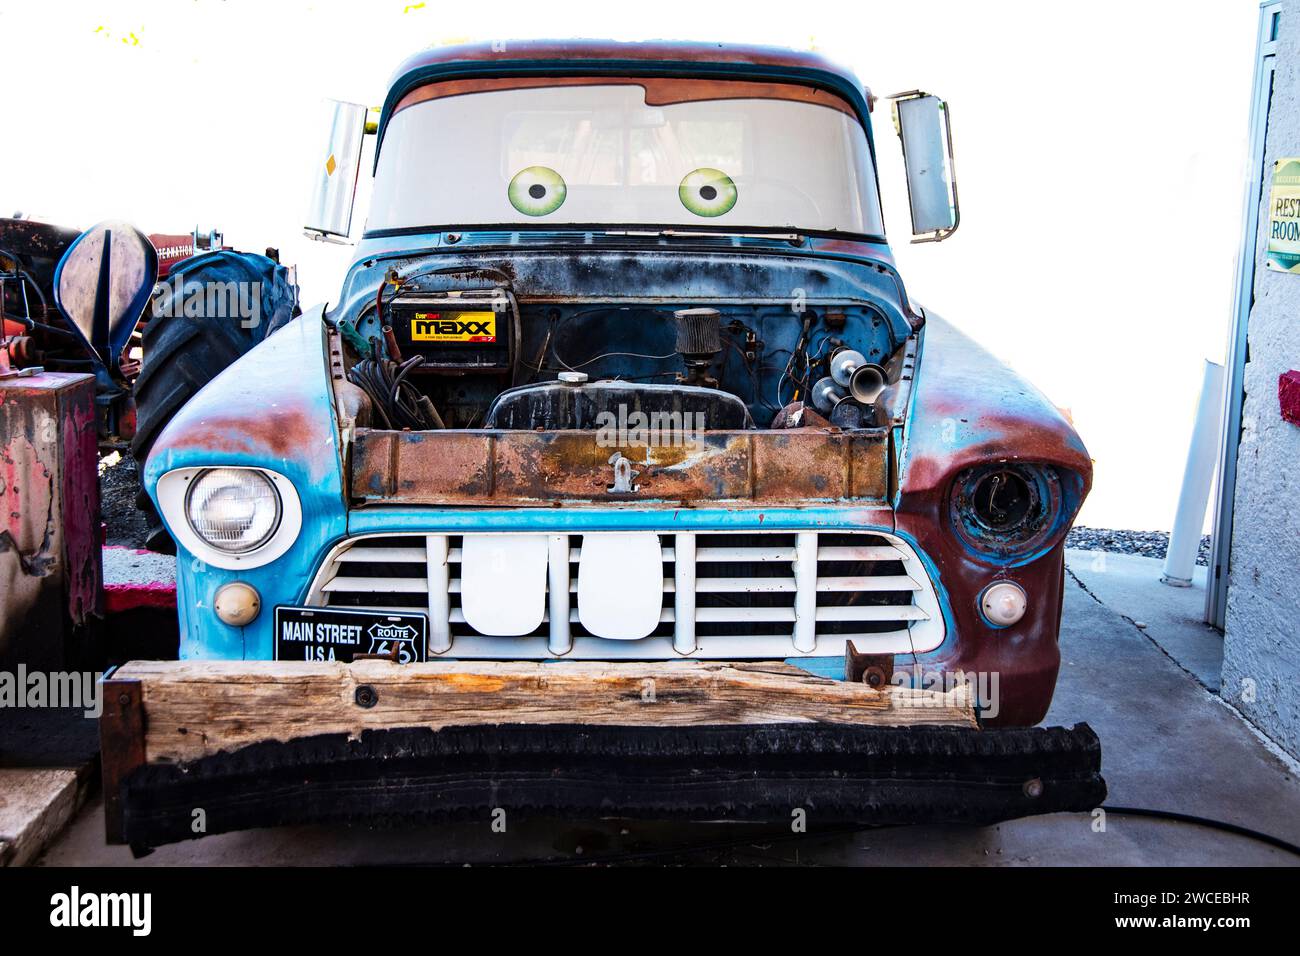 Face painted on an old pick-up truck at a gas station in Filer, Idaho, USA Stock Photo